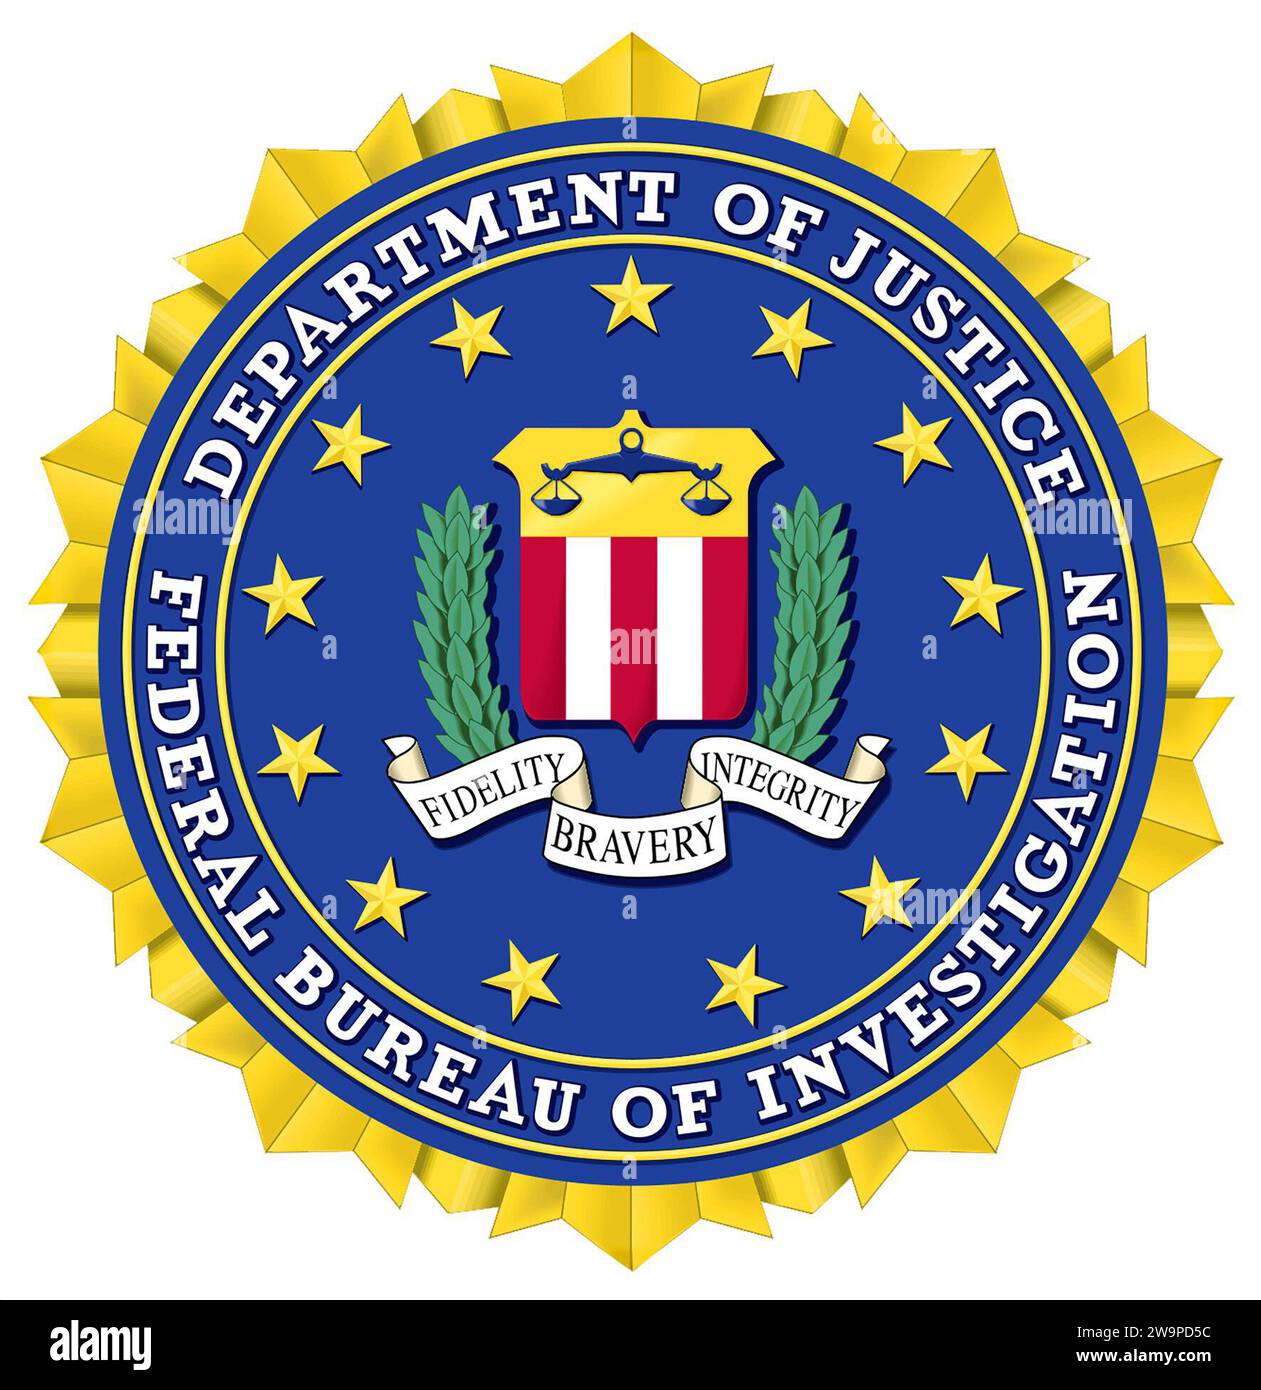 FBI Logo. Logo of the Federal Bureau of Investigation. Public domain from a copyright standpoint, but other restrictions apply. In the US, unauthorized use of the FBI seal, name, and initials are subject to prosecution under Federal Criminal law. Stock Photo